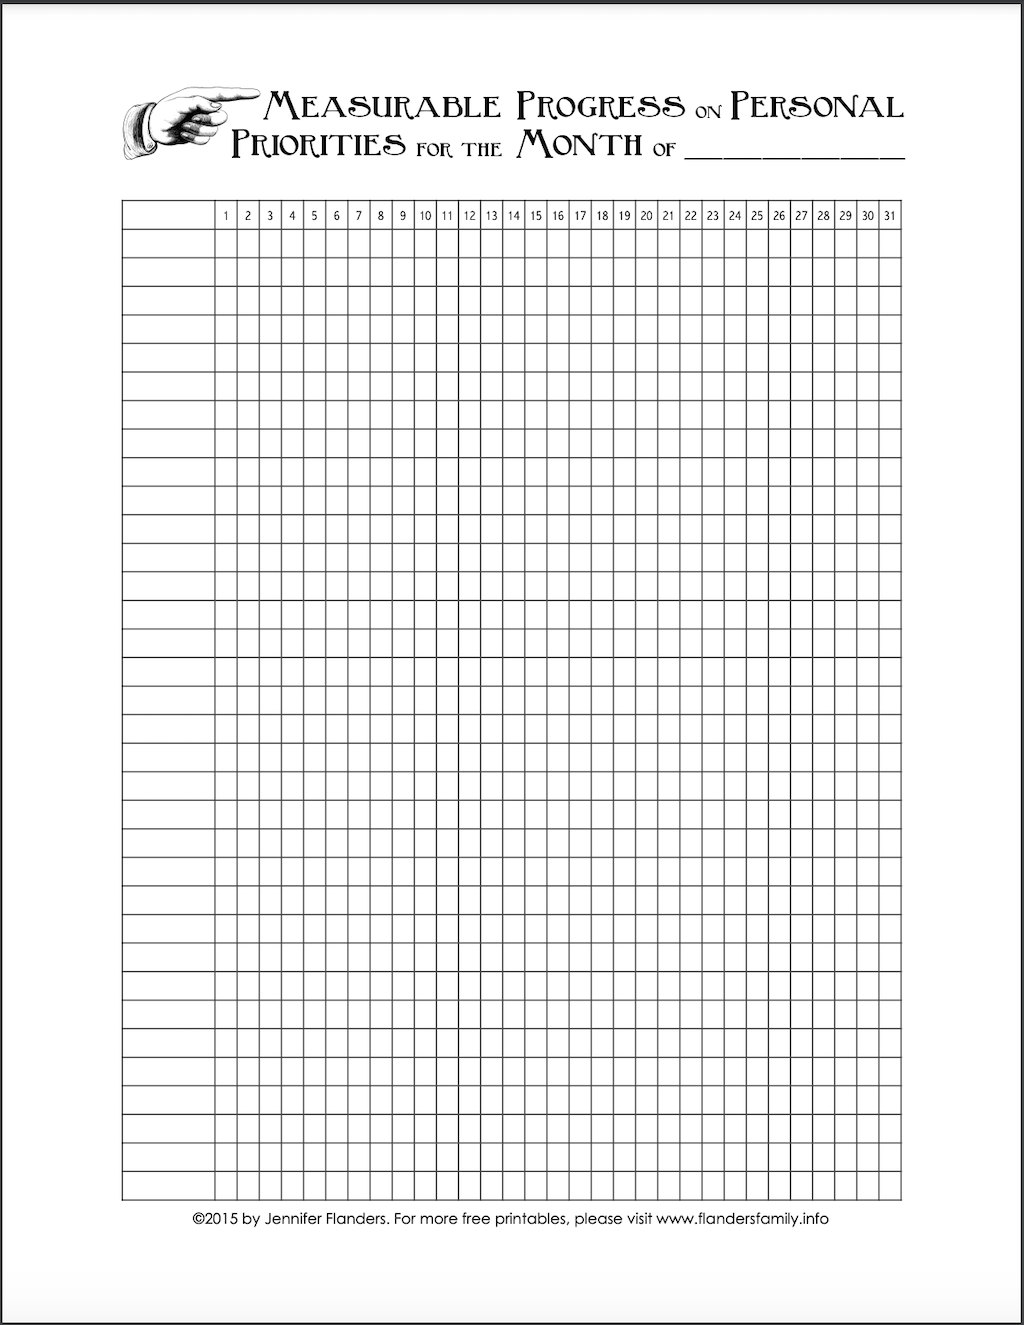 Free Printable Chart for Tracking Progress on Daily Goals